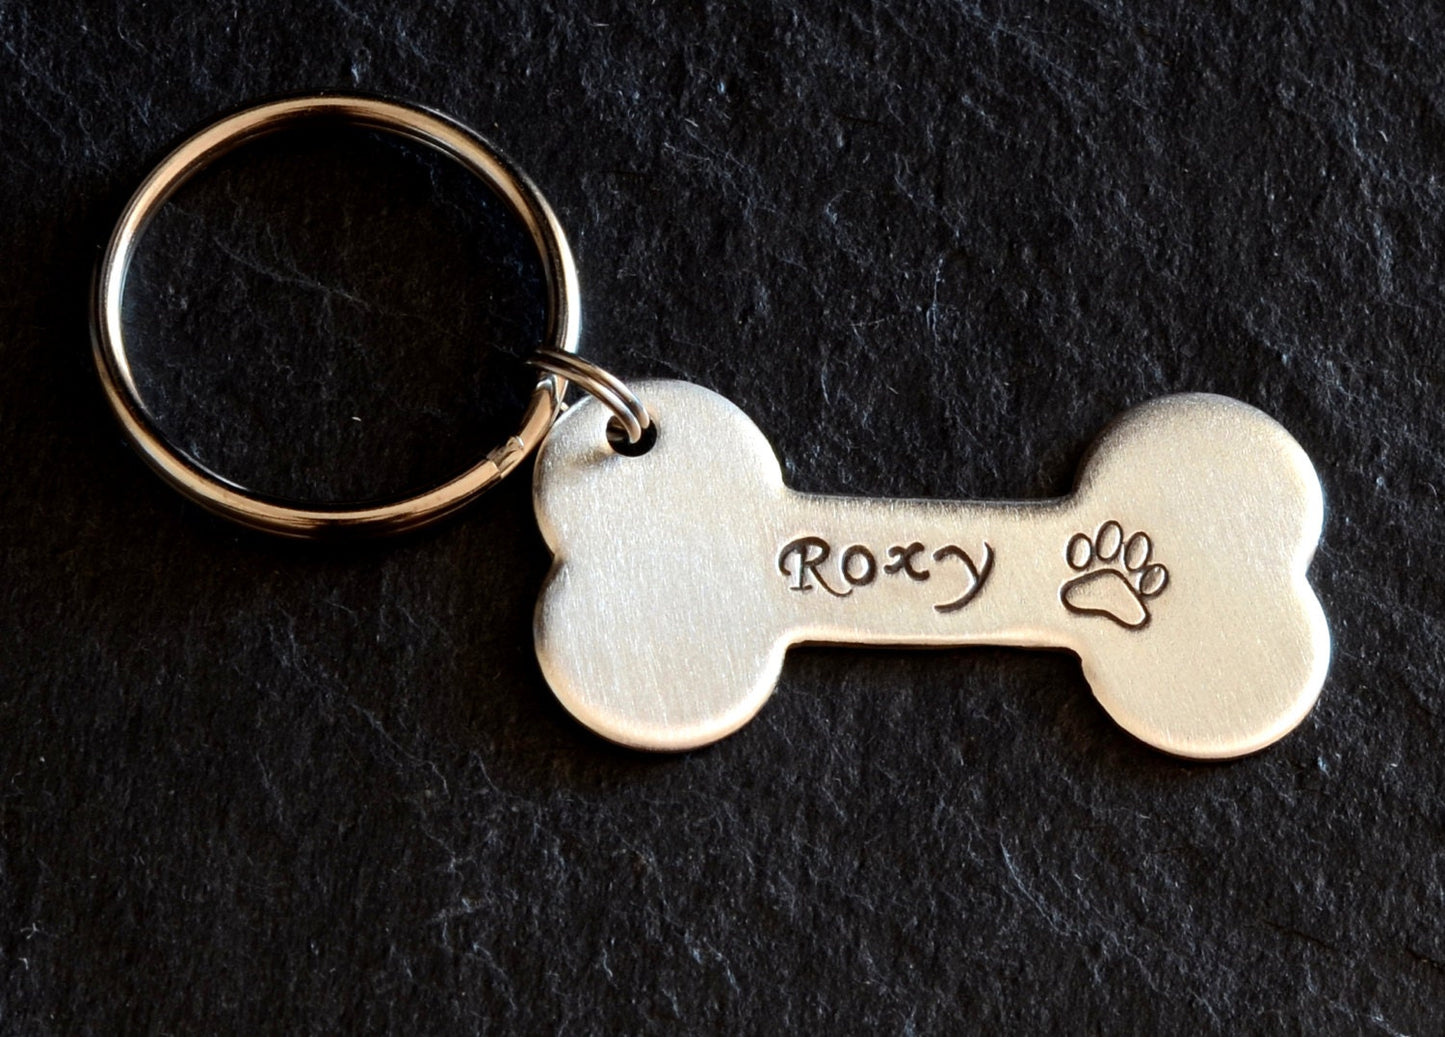 Sterling silver personalized bone shaped dog tag